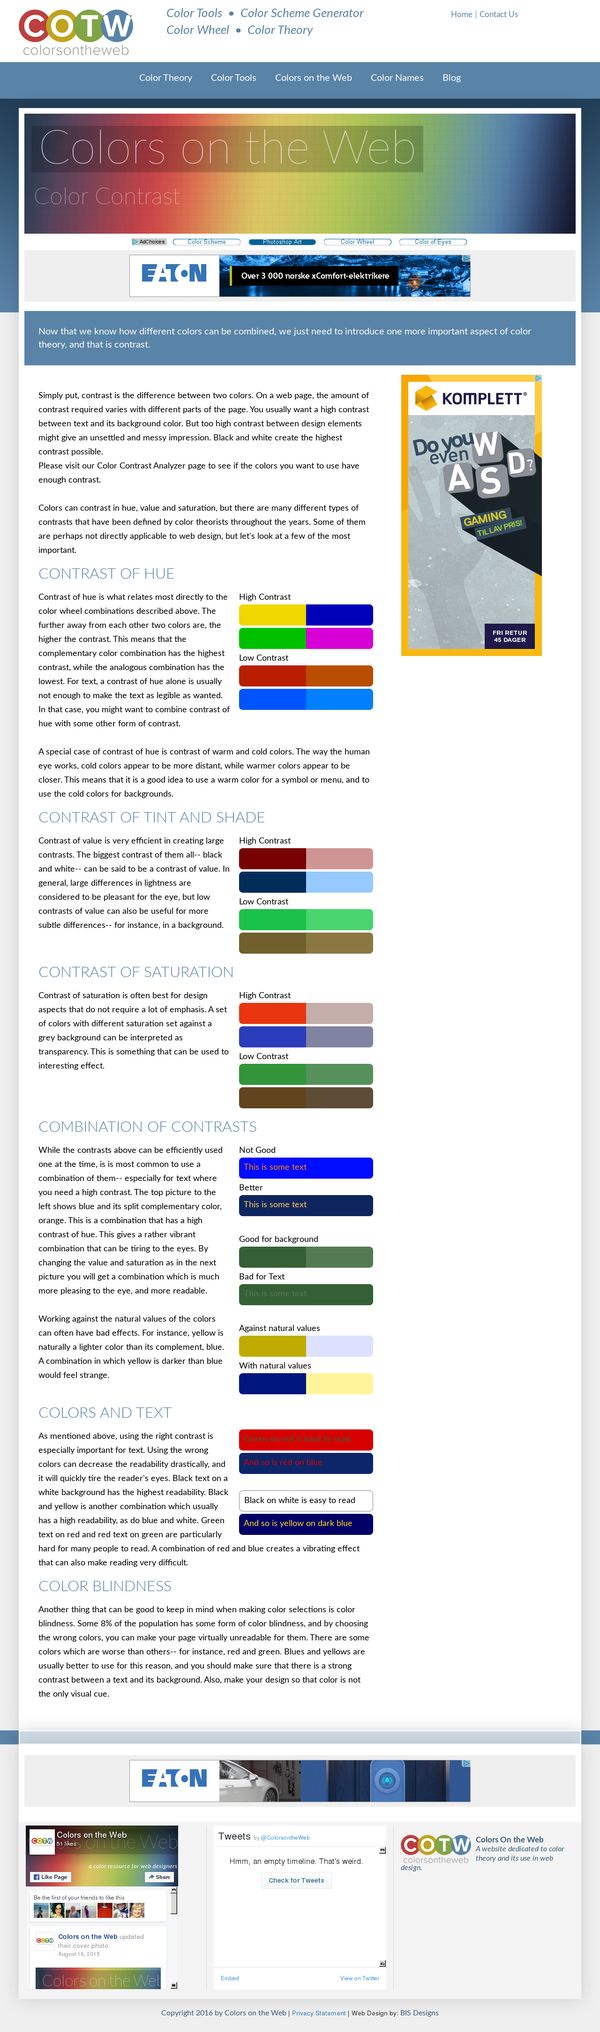 Color Contrasts - Hue, value saturation - Colors on the Web